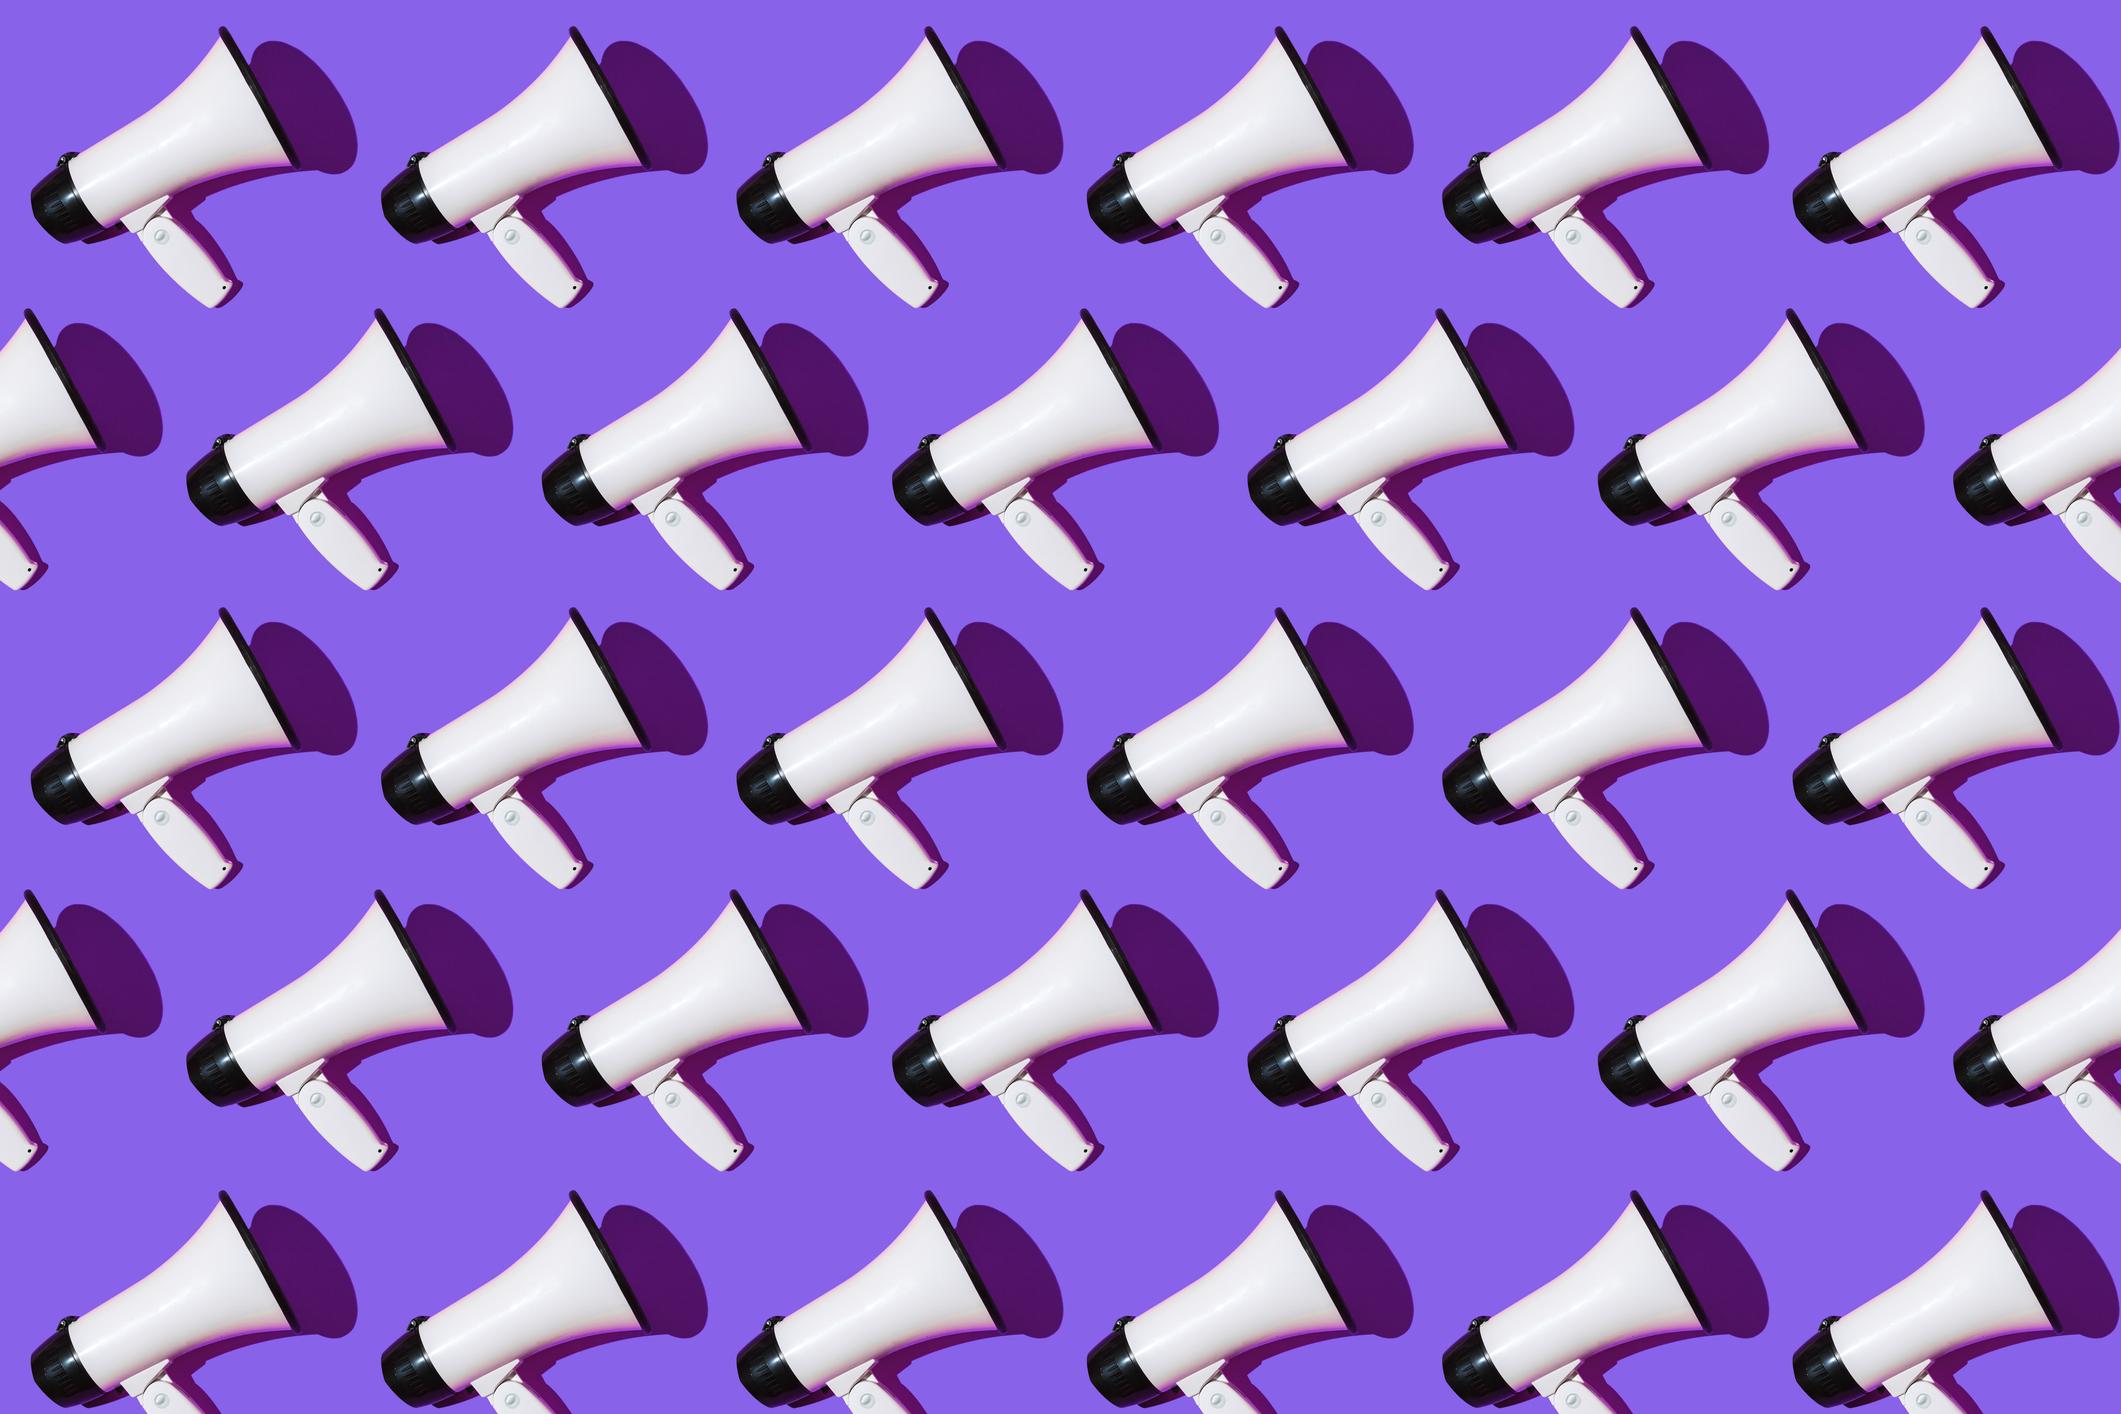 White megaphones pattern with black ornament on purple background. Shout, message, announcement and news concept.